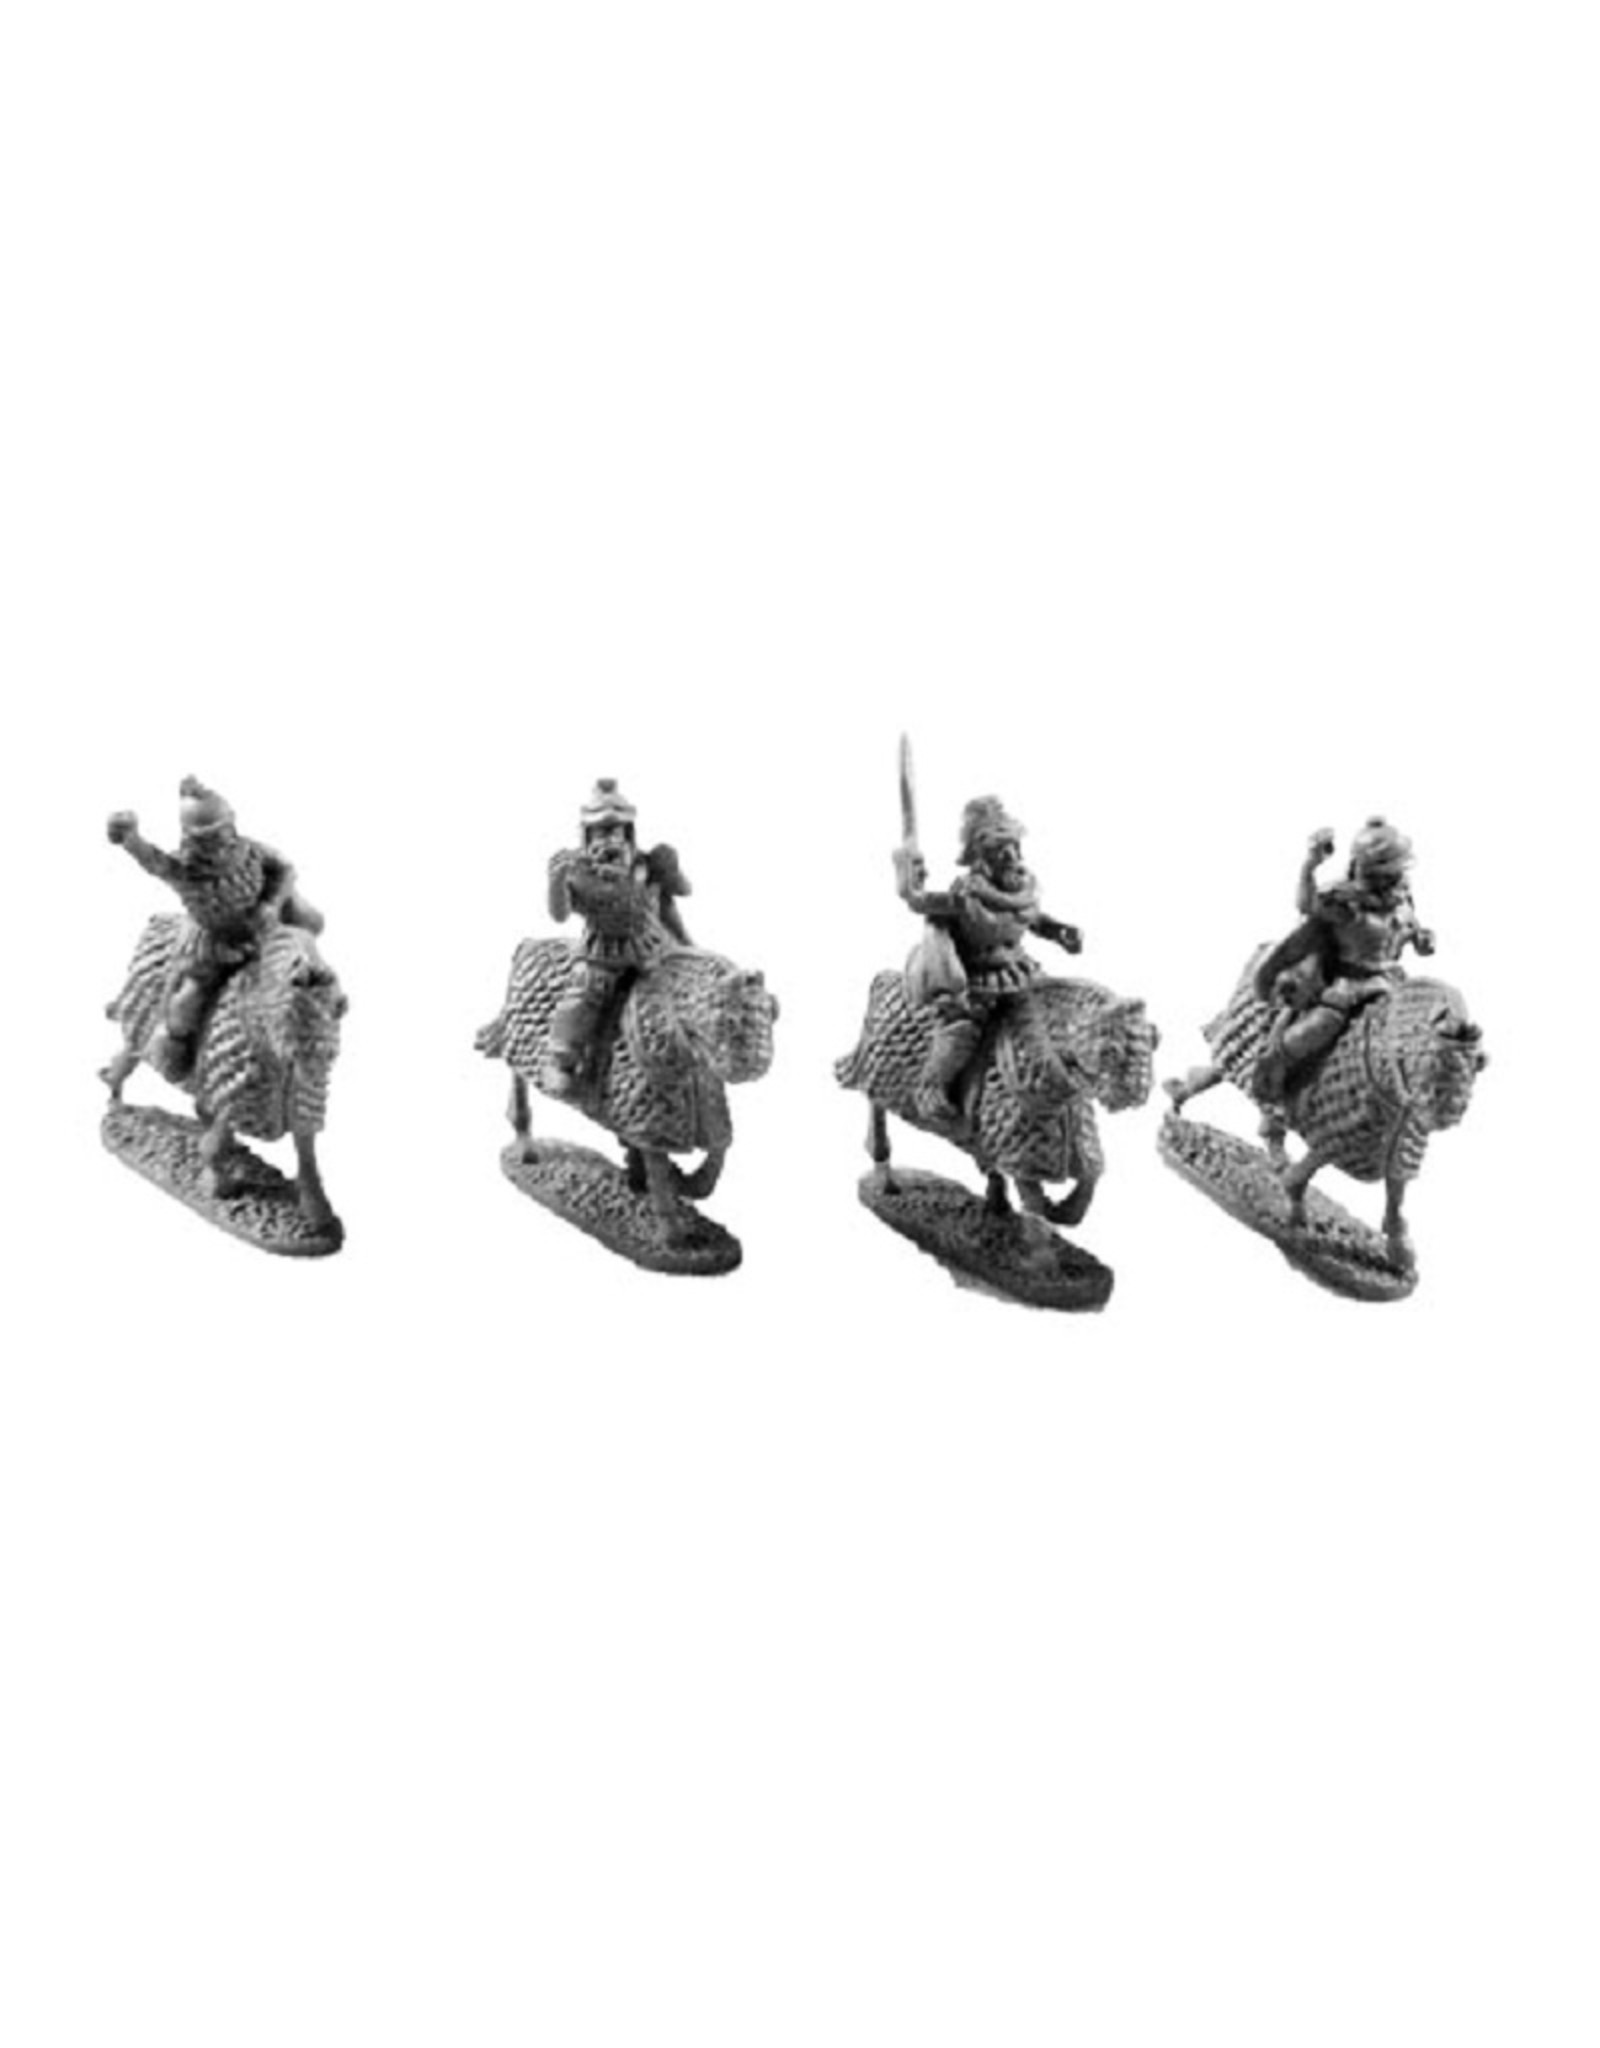 Xyston ANC20214 - Maccabean Mounted Generals